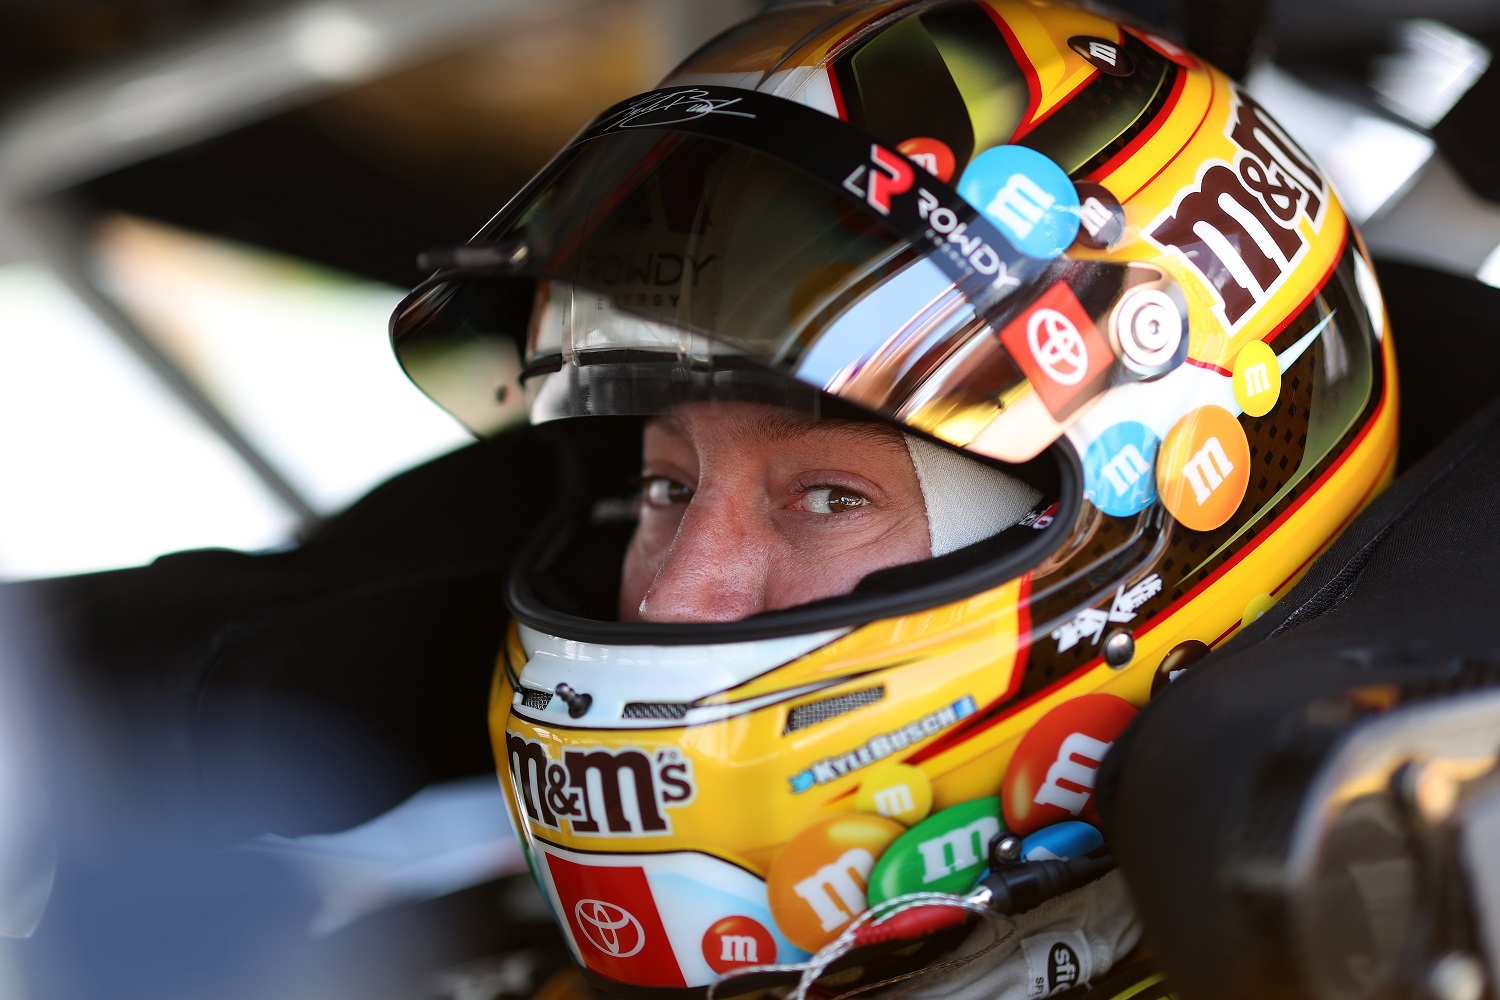 Kyle Busch sits in his Toyota during qualifying for the NASCAR Cup Series Goodyear 400 at Darlington Raceway on May 7, 2022. | James Gilbert/Getty Images